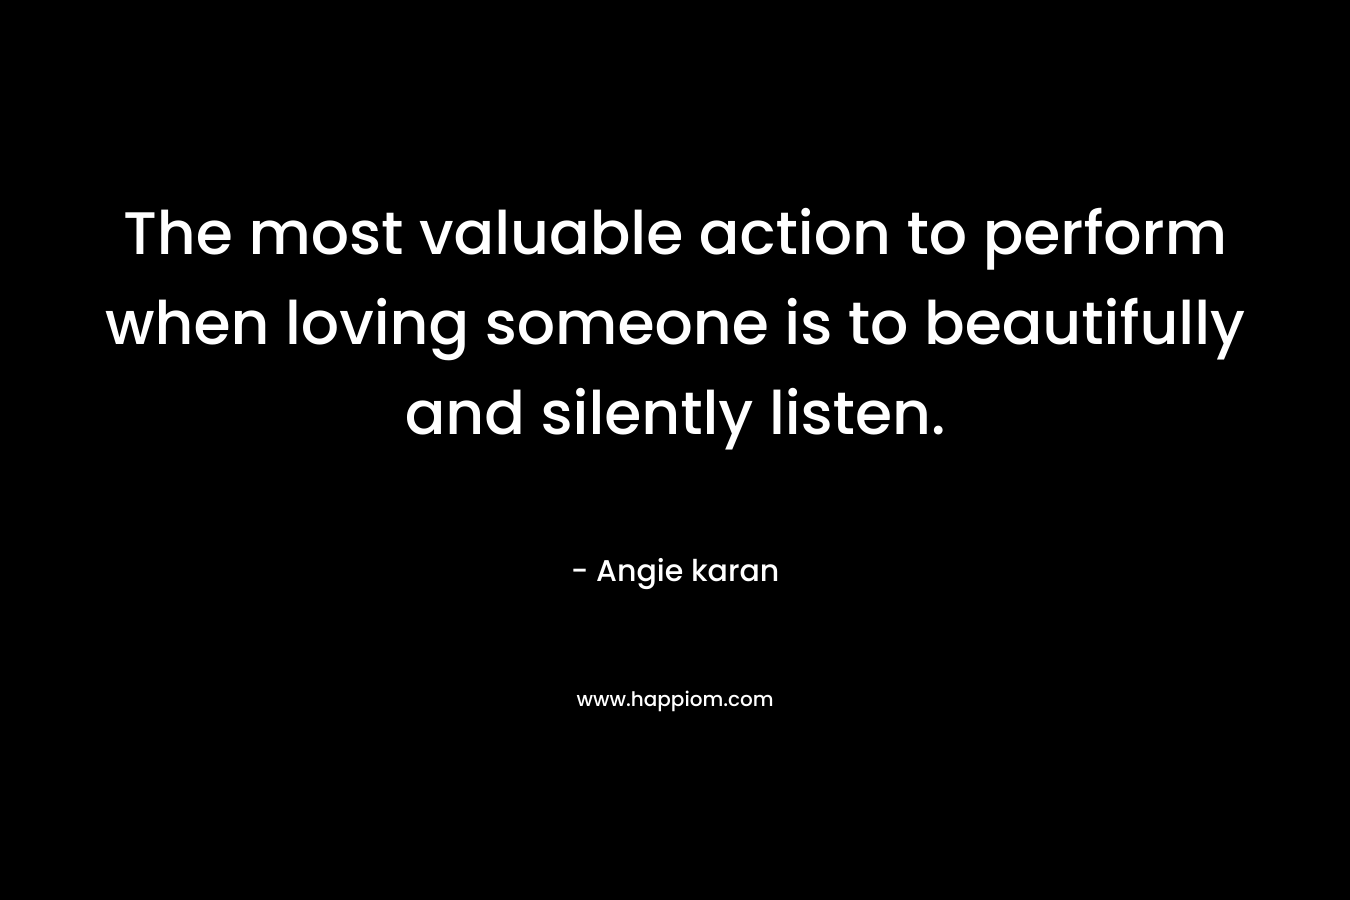 The most valuable action to perform when loving someone is to beautifully and silently listen.